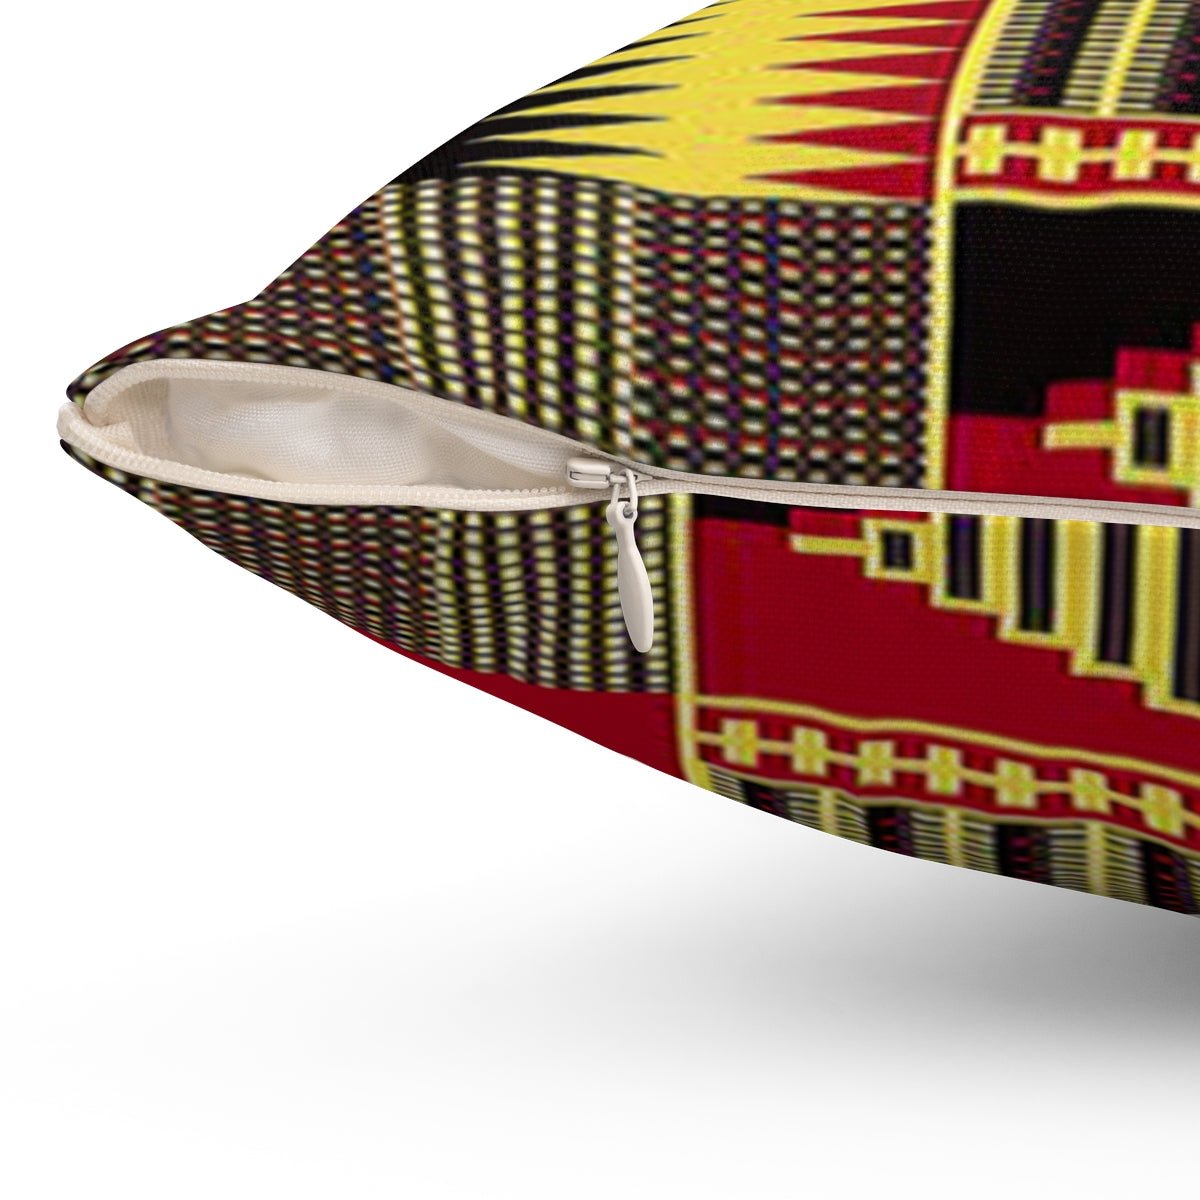 2 Sets of Kente Cushion Pillow Case Throw Cover - Bynelo